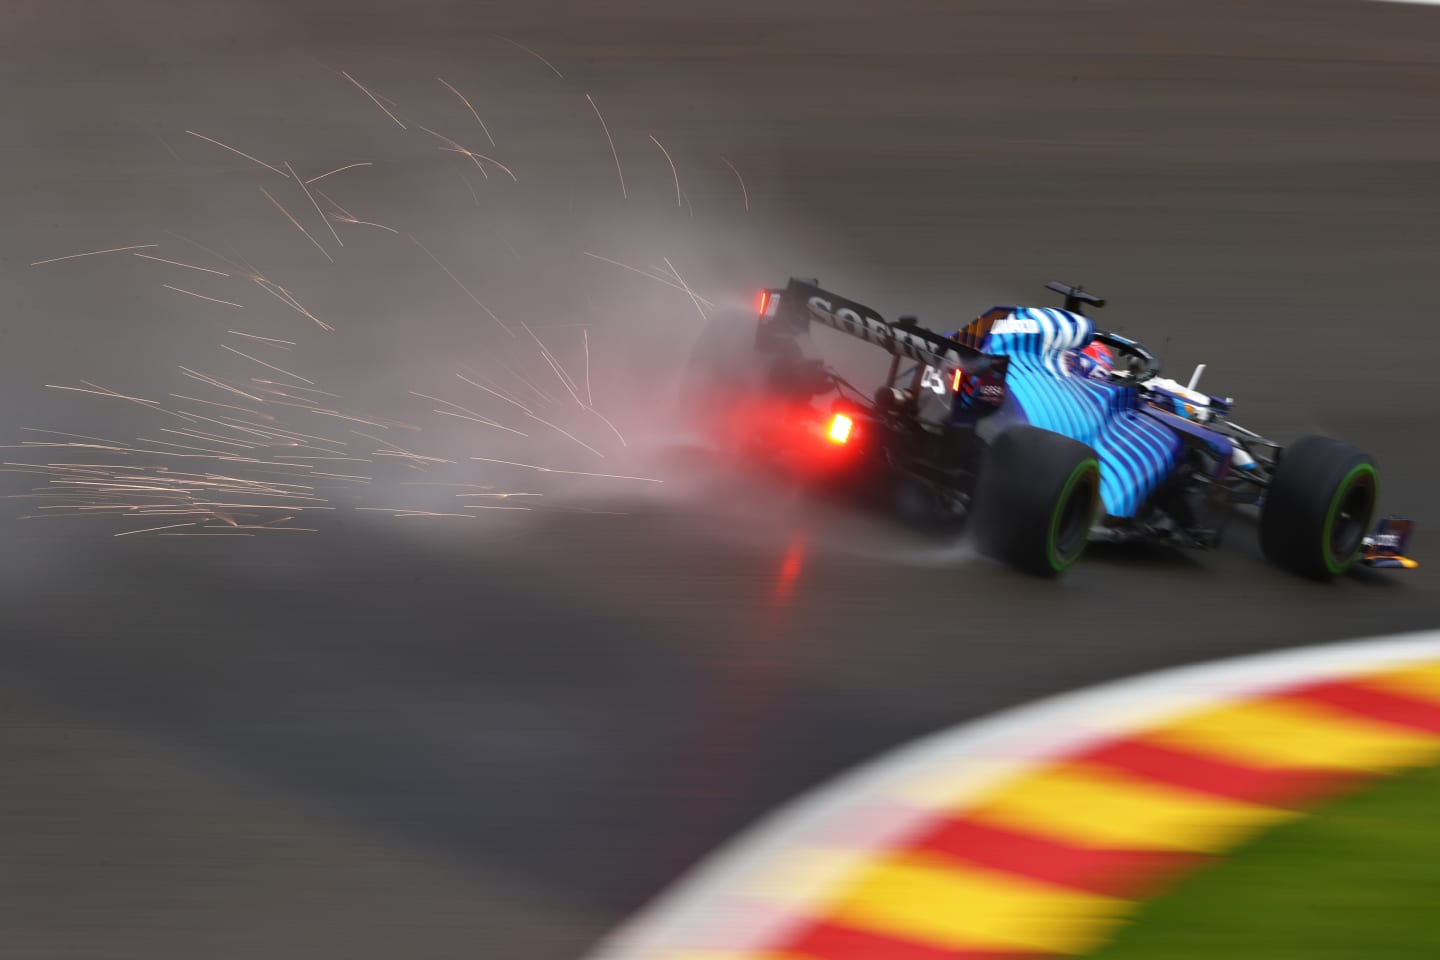 SPA, BELGIUM - AUGUST 28: Sparks fly behind George Russell of Great Britain driving the (63) Williams Racing FW43B Mercedes during qualifying ahead of the F1 Grand Prix of Belgium at Circuit de Spa-Francorchamps on August 28, 2021 in Spa, Belgium. (Photo by Dan Istitene - Formula 1/Formula 1 via Getty Images)